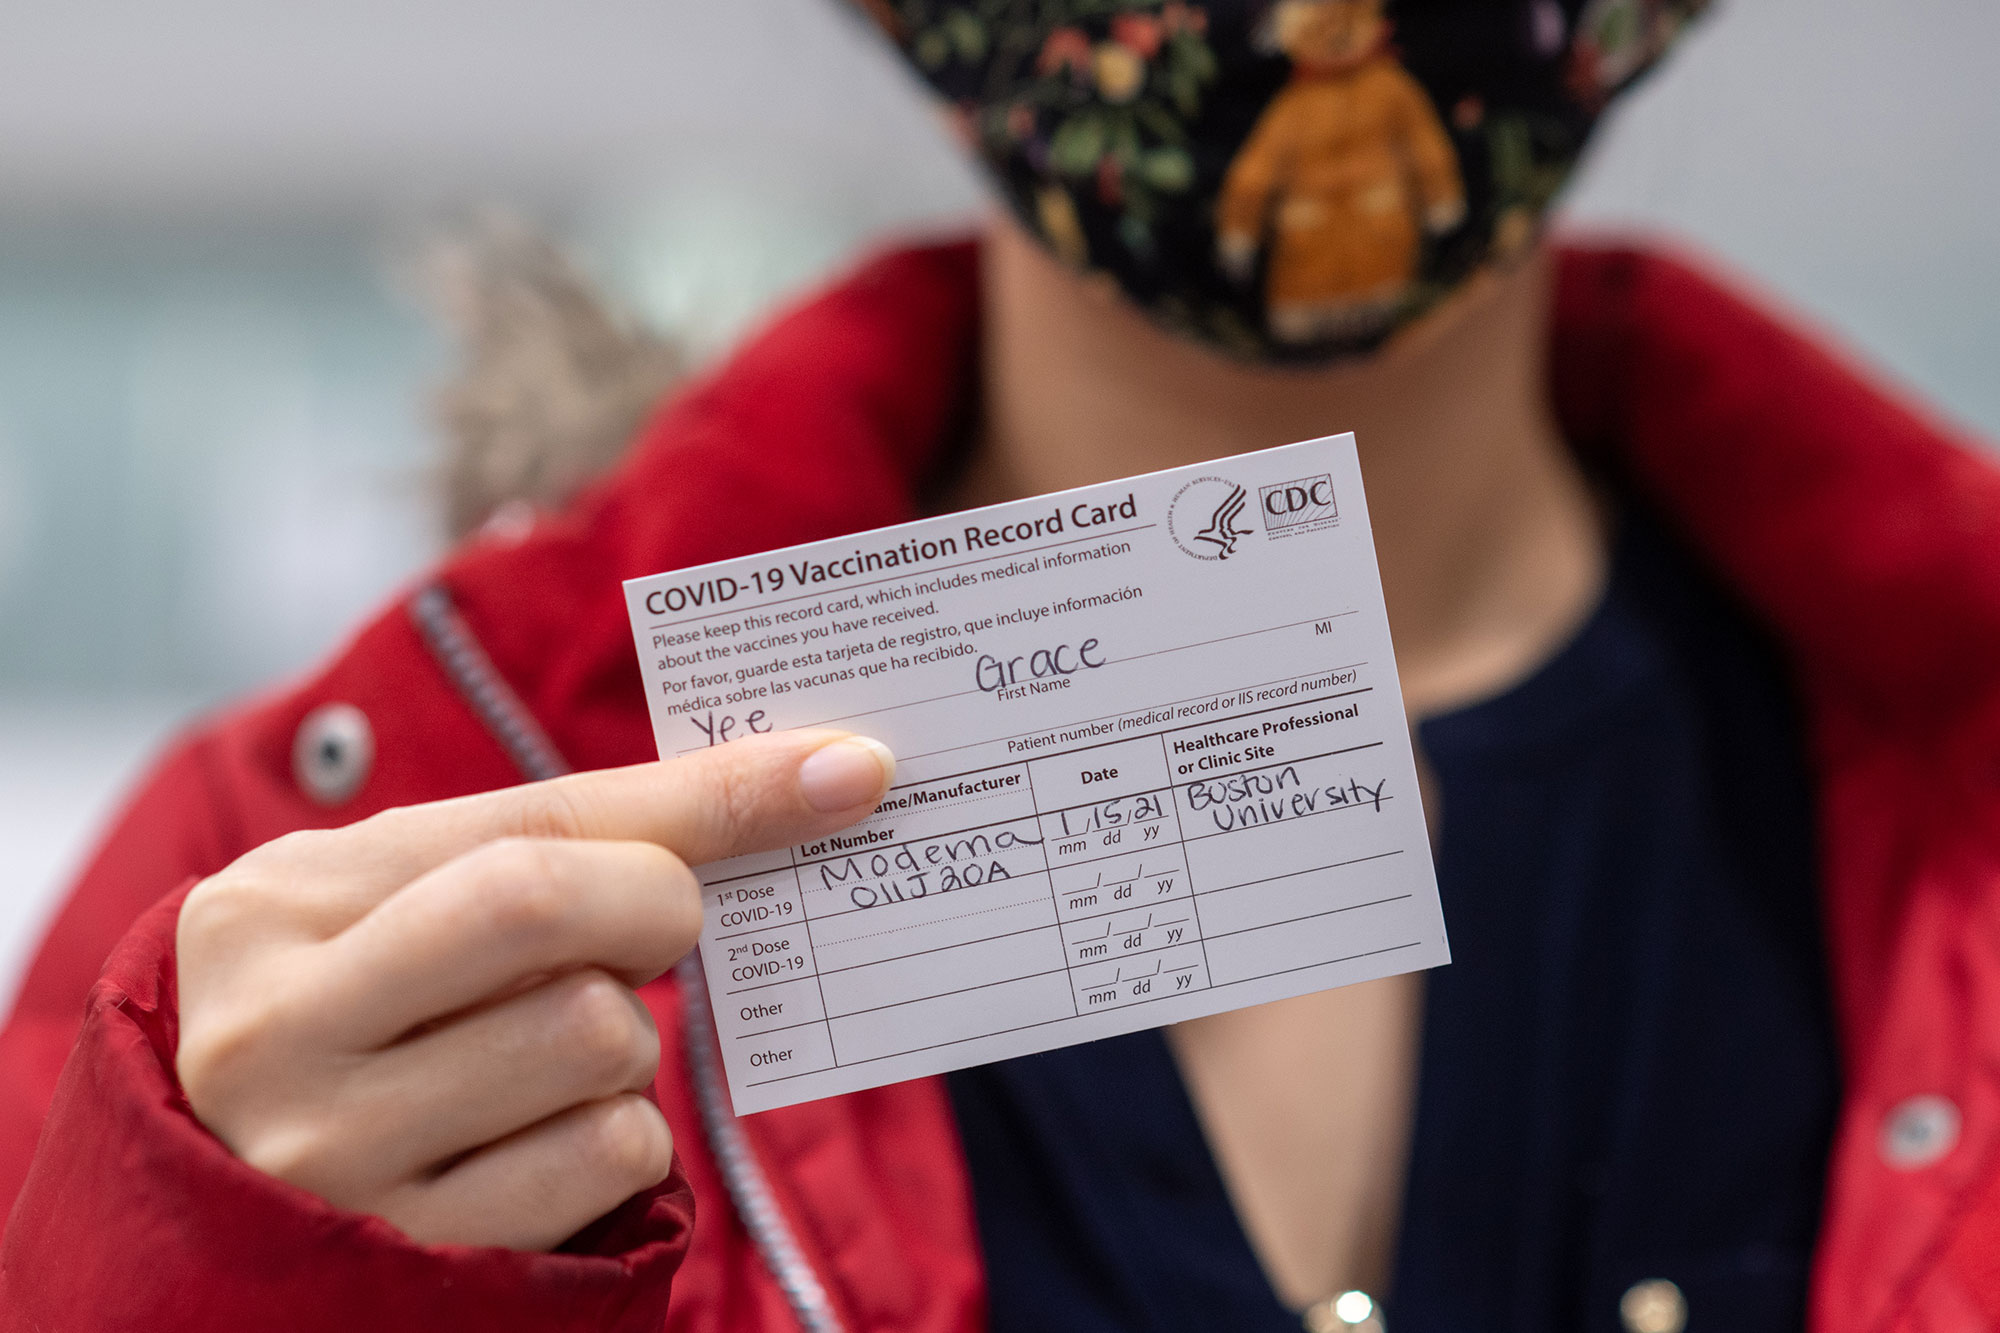 Healthway nurse practitioner case manager Grace Yee does up her CDC Vaccination verification card after receiving the Moderna COVID-19 vaccine January 15 at FitRec. She wears a red winter jacket and a patterned mask. The card is seen in the foreground and she is blurred.